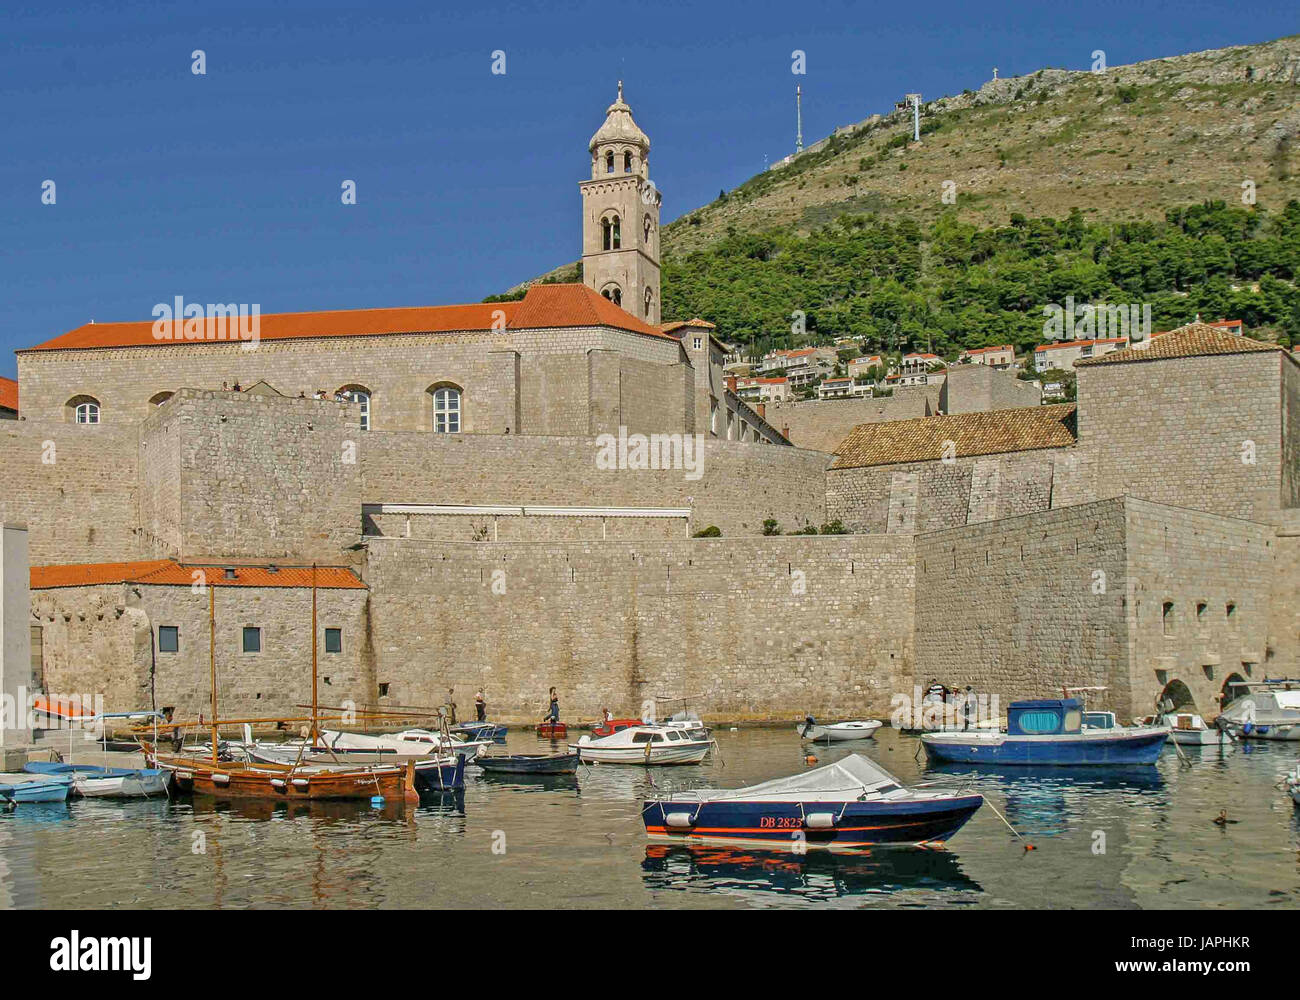 October 5, 2004 - Dubrovnik, Dubrovnik-Neretva County, Croatia - The Asimov Tower of the Dominican Monastery rises above the Old Port (Stari Porto) of the historic Old Town of Dubrovnik, encircled with massive medieval stonewalls. On the Adriatic Sea in southern Croatia, it is a UNESCO World Heritage Site and a top tourist destination. Credit: Arnold Drapkin/ZUMA Wire/Alamy Live News Stock Photo